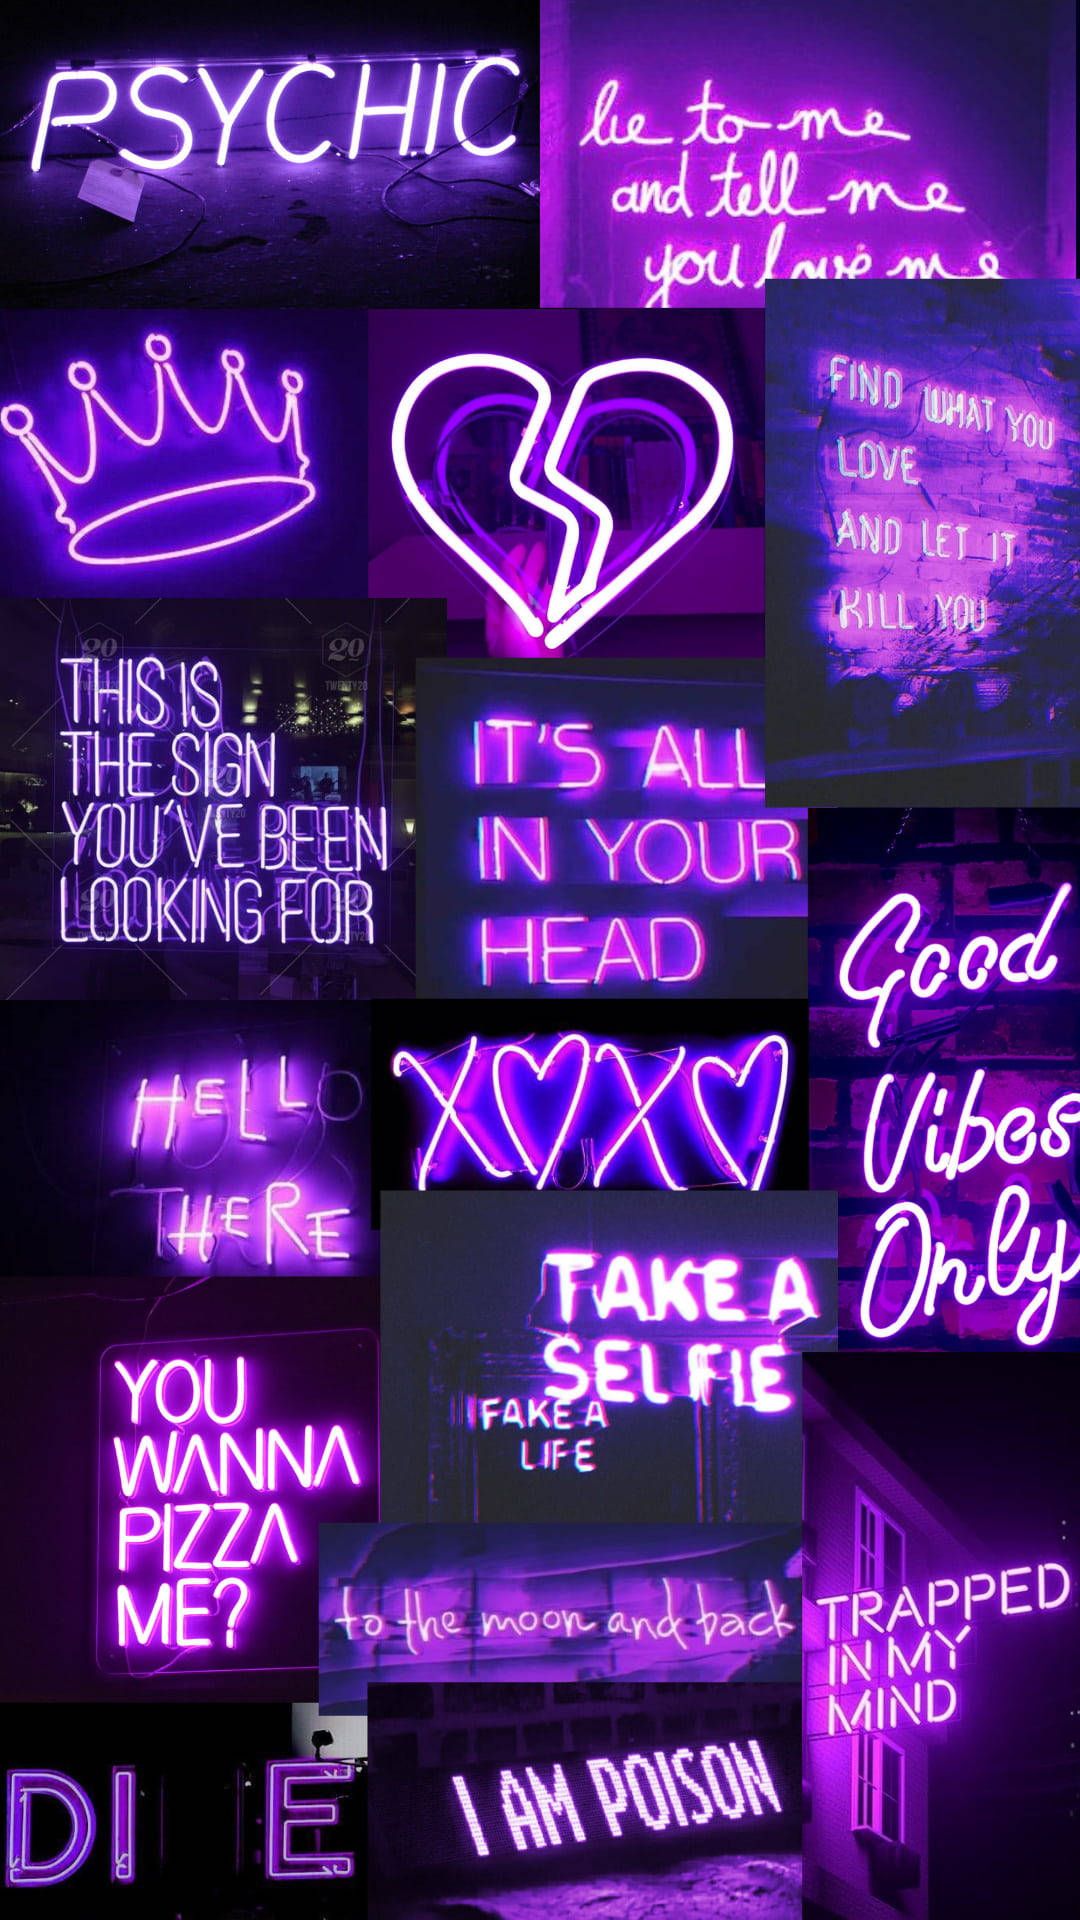 A collection of neon signs with different words on them - Purple, neon, light purple, neon purple, cool, dark purple